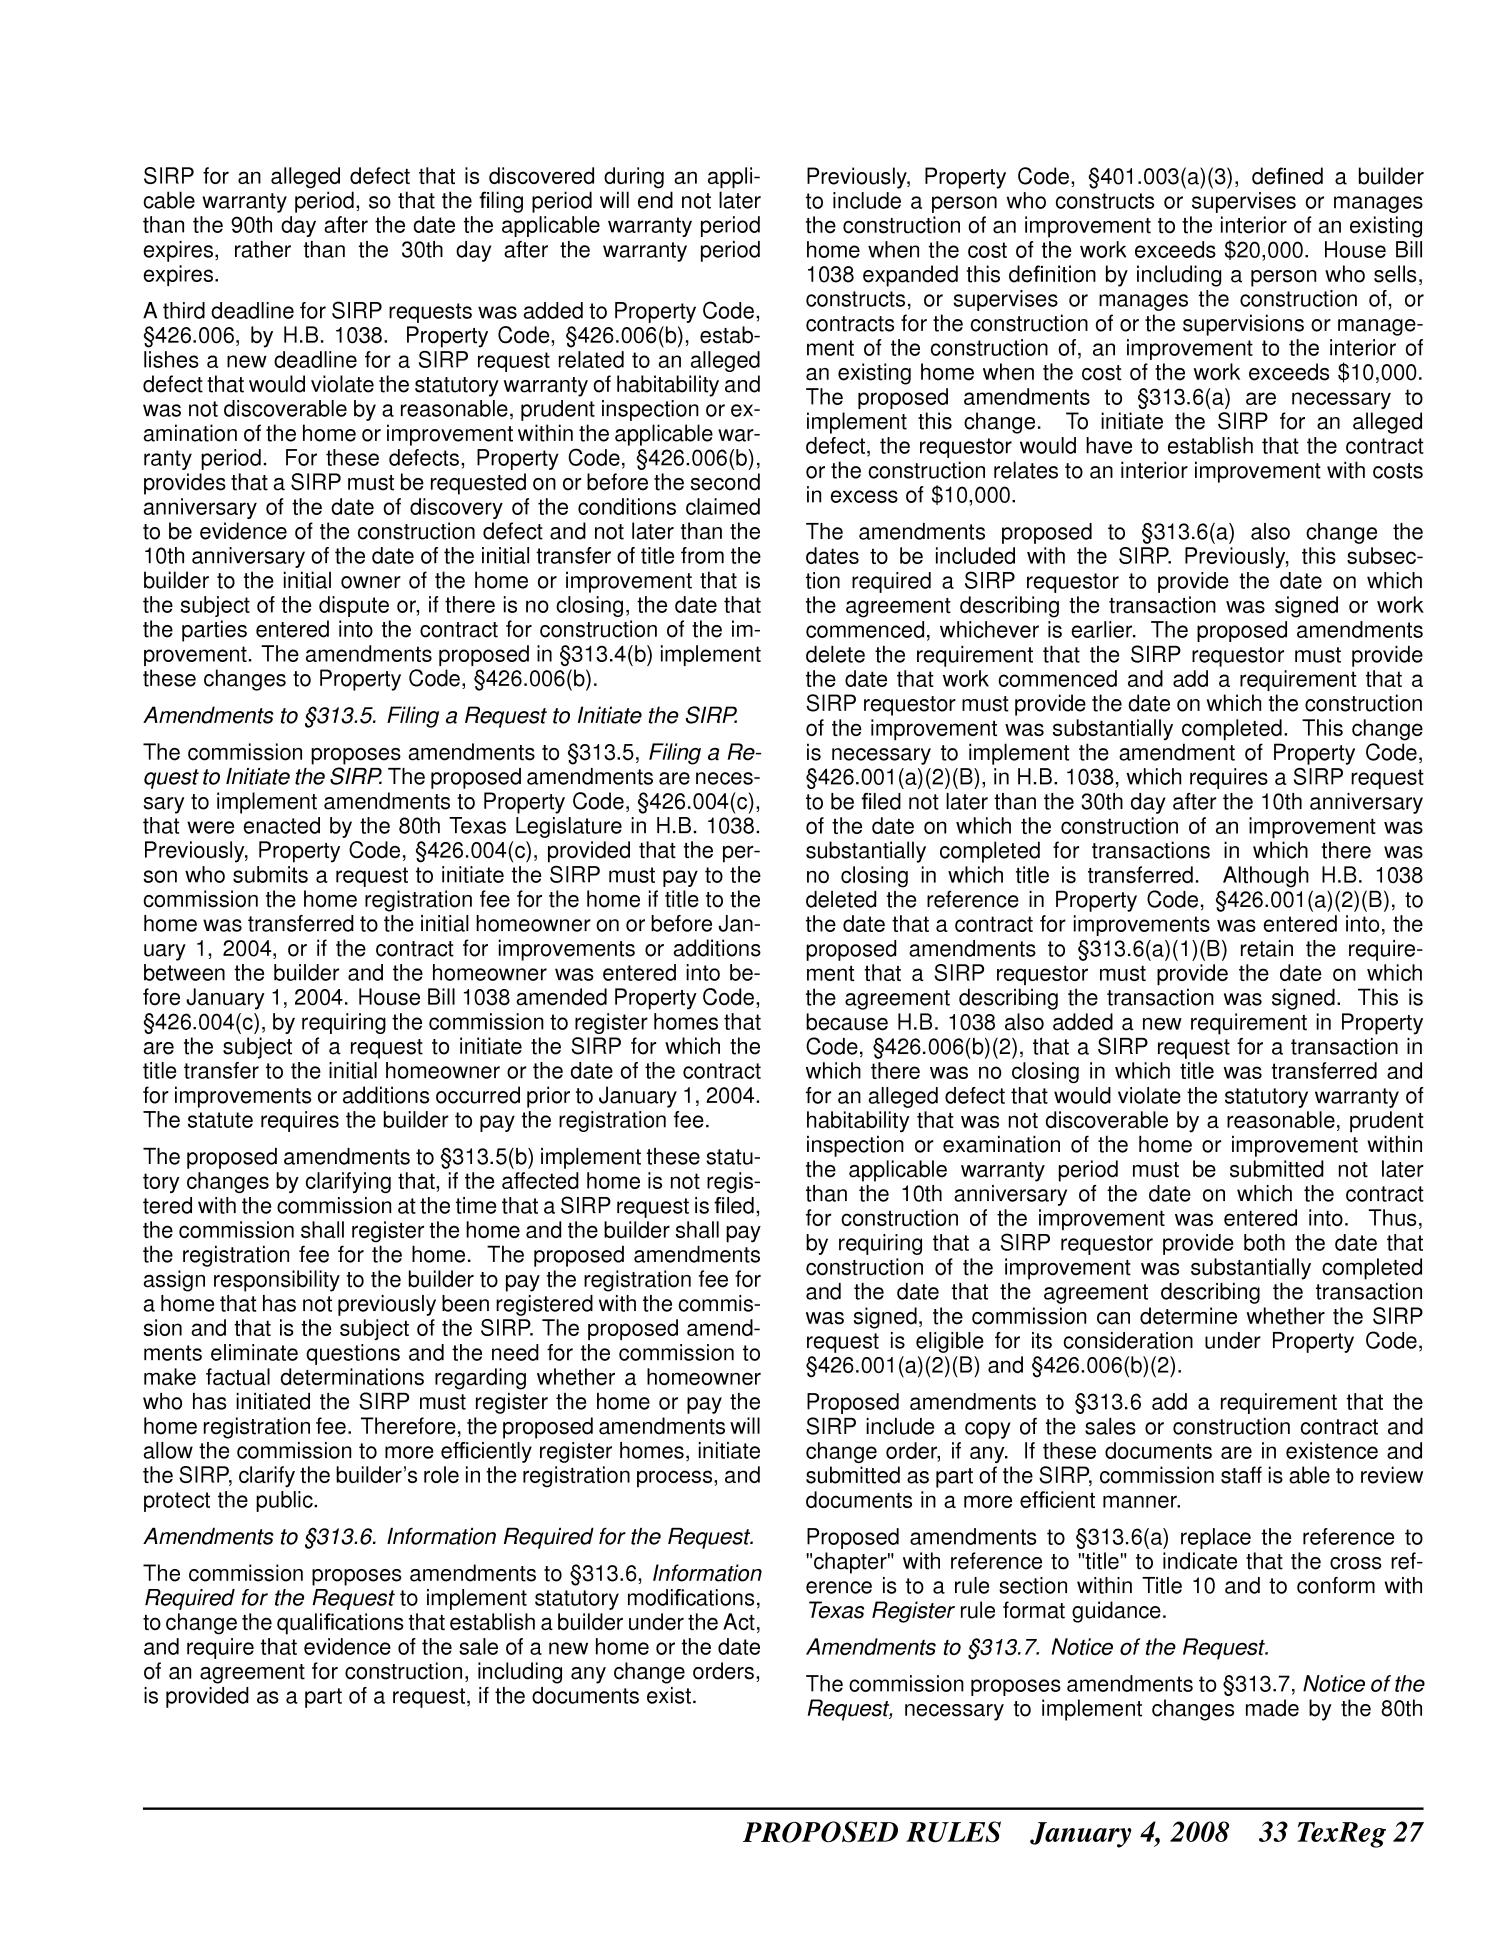 Texas Register, Volume 33, Number 1, Pages 1-358, January 4, 2008
                                                
                                                    27
                                                